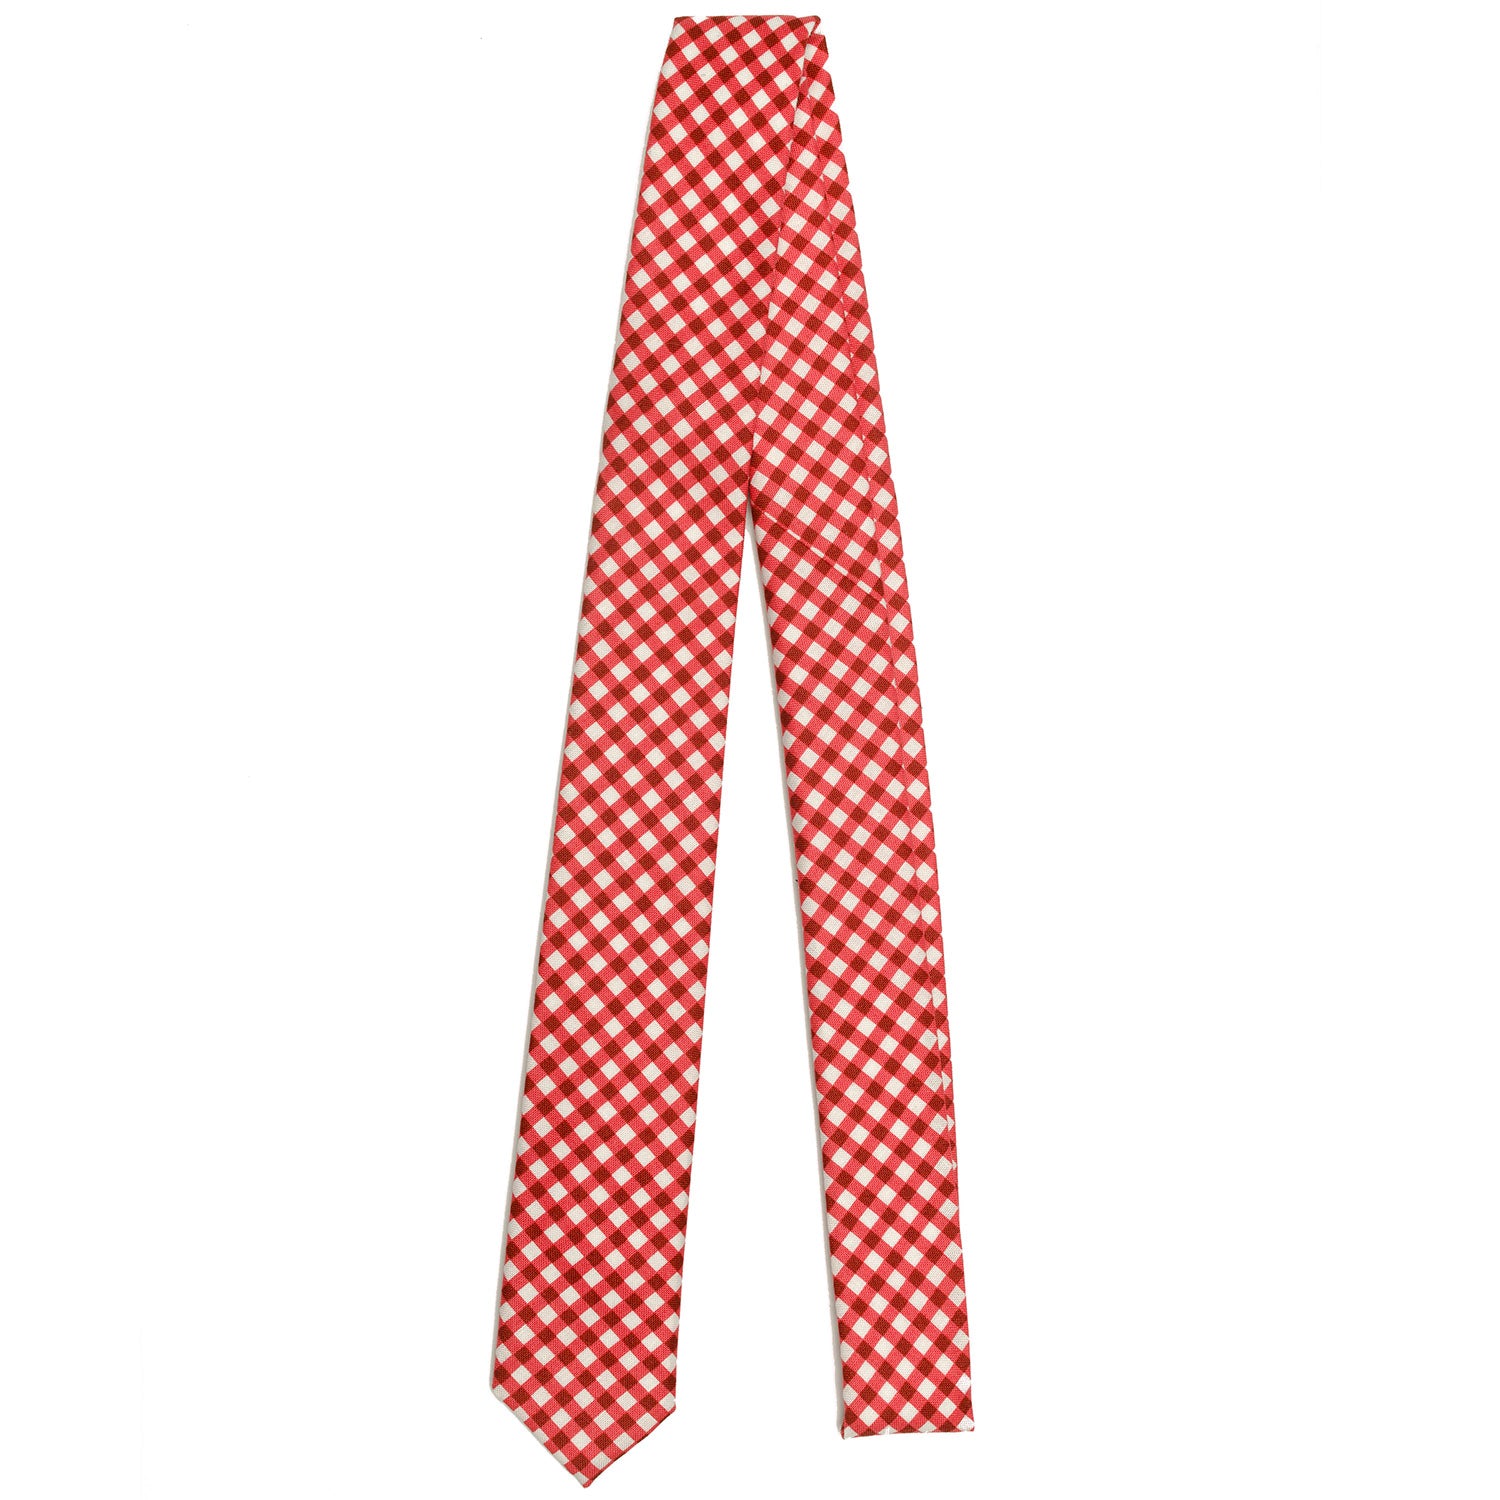 Red and White Checker Print With Your Choice Trim Color 1 Piece